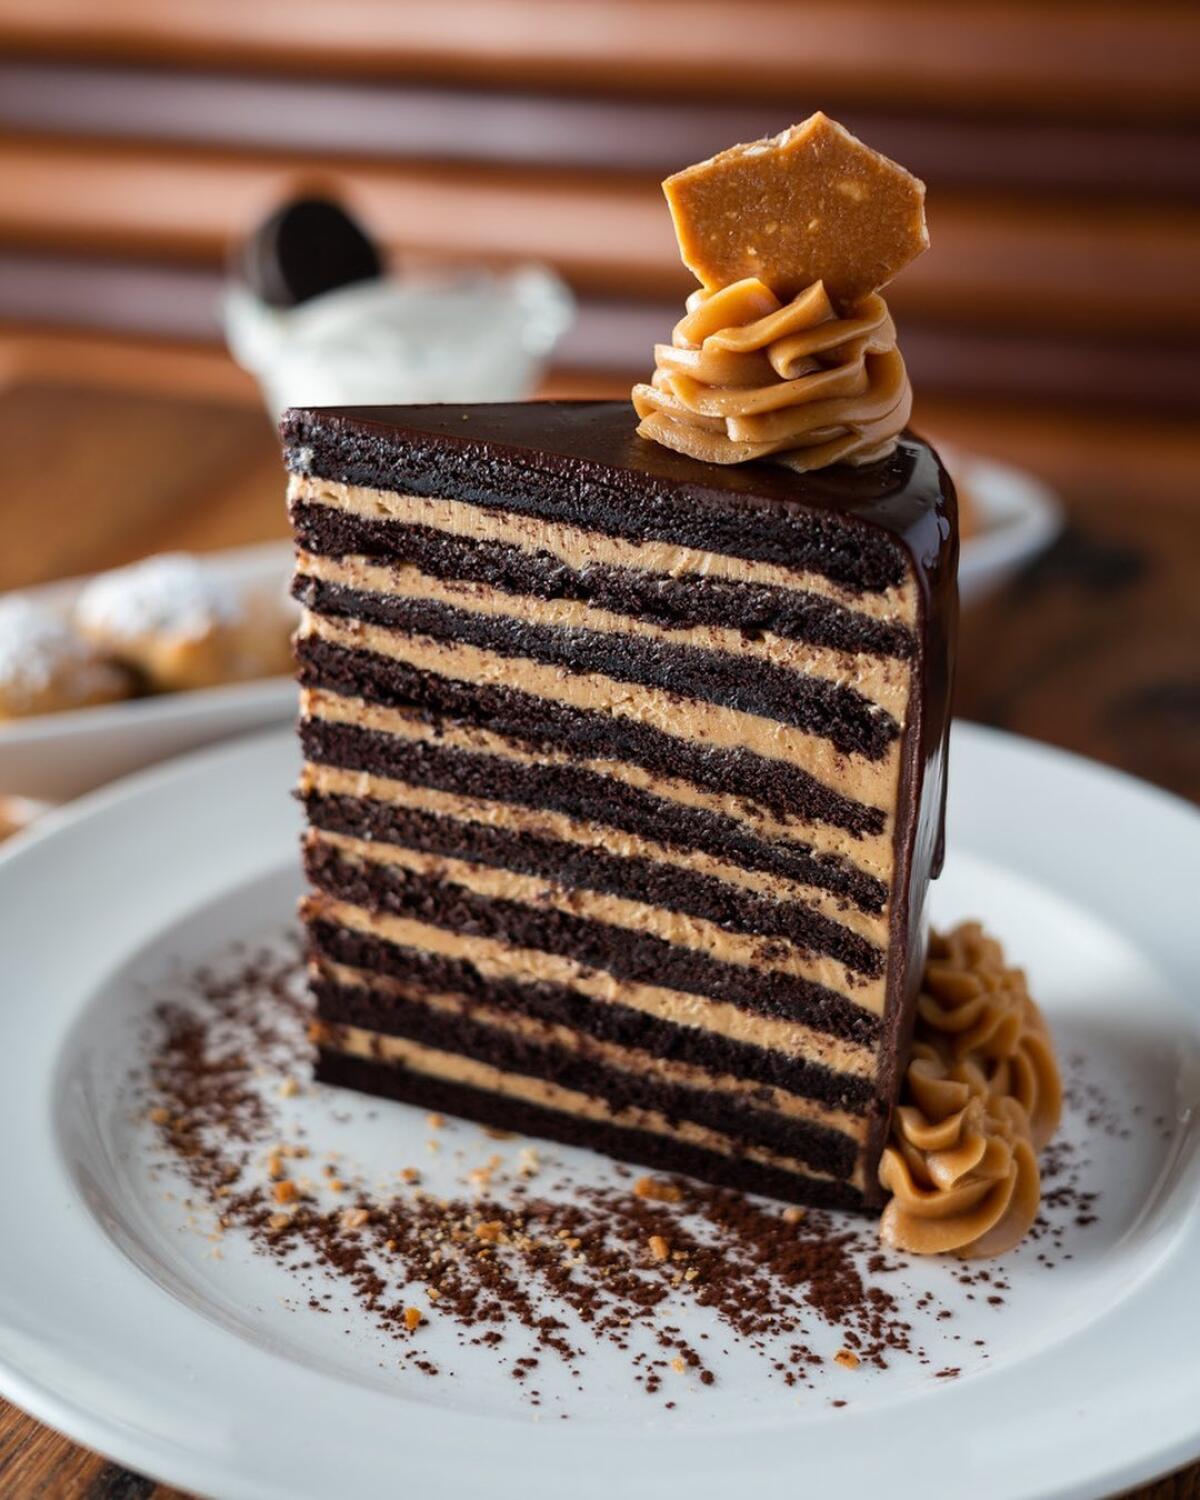 The 20-layer chocolate cake at LAVO Italian restaurant in the Gaslamp Quarter.